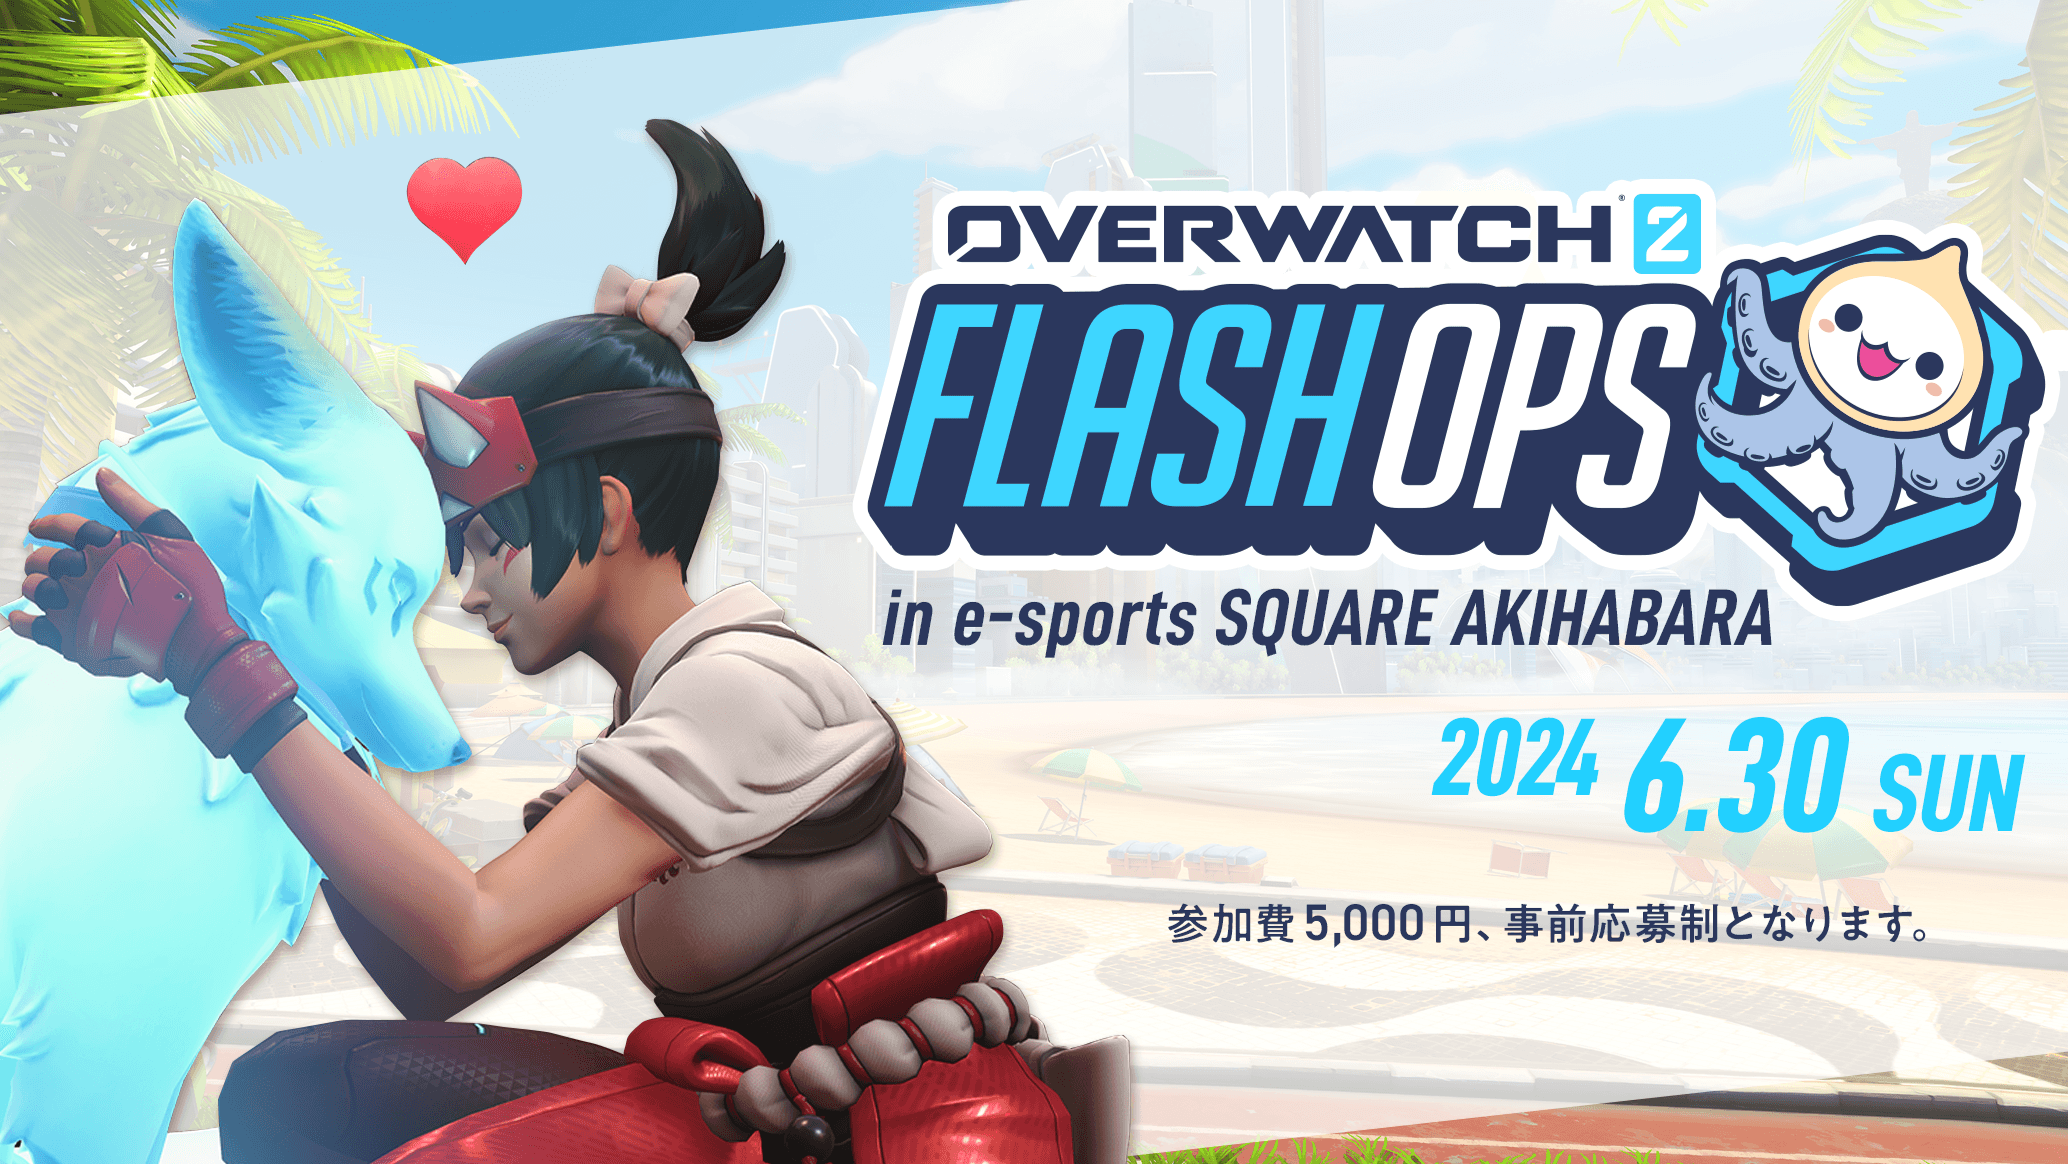 OVERWATCH 2 FLASHOPS 2024 SUMMER feature image